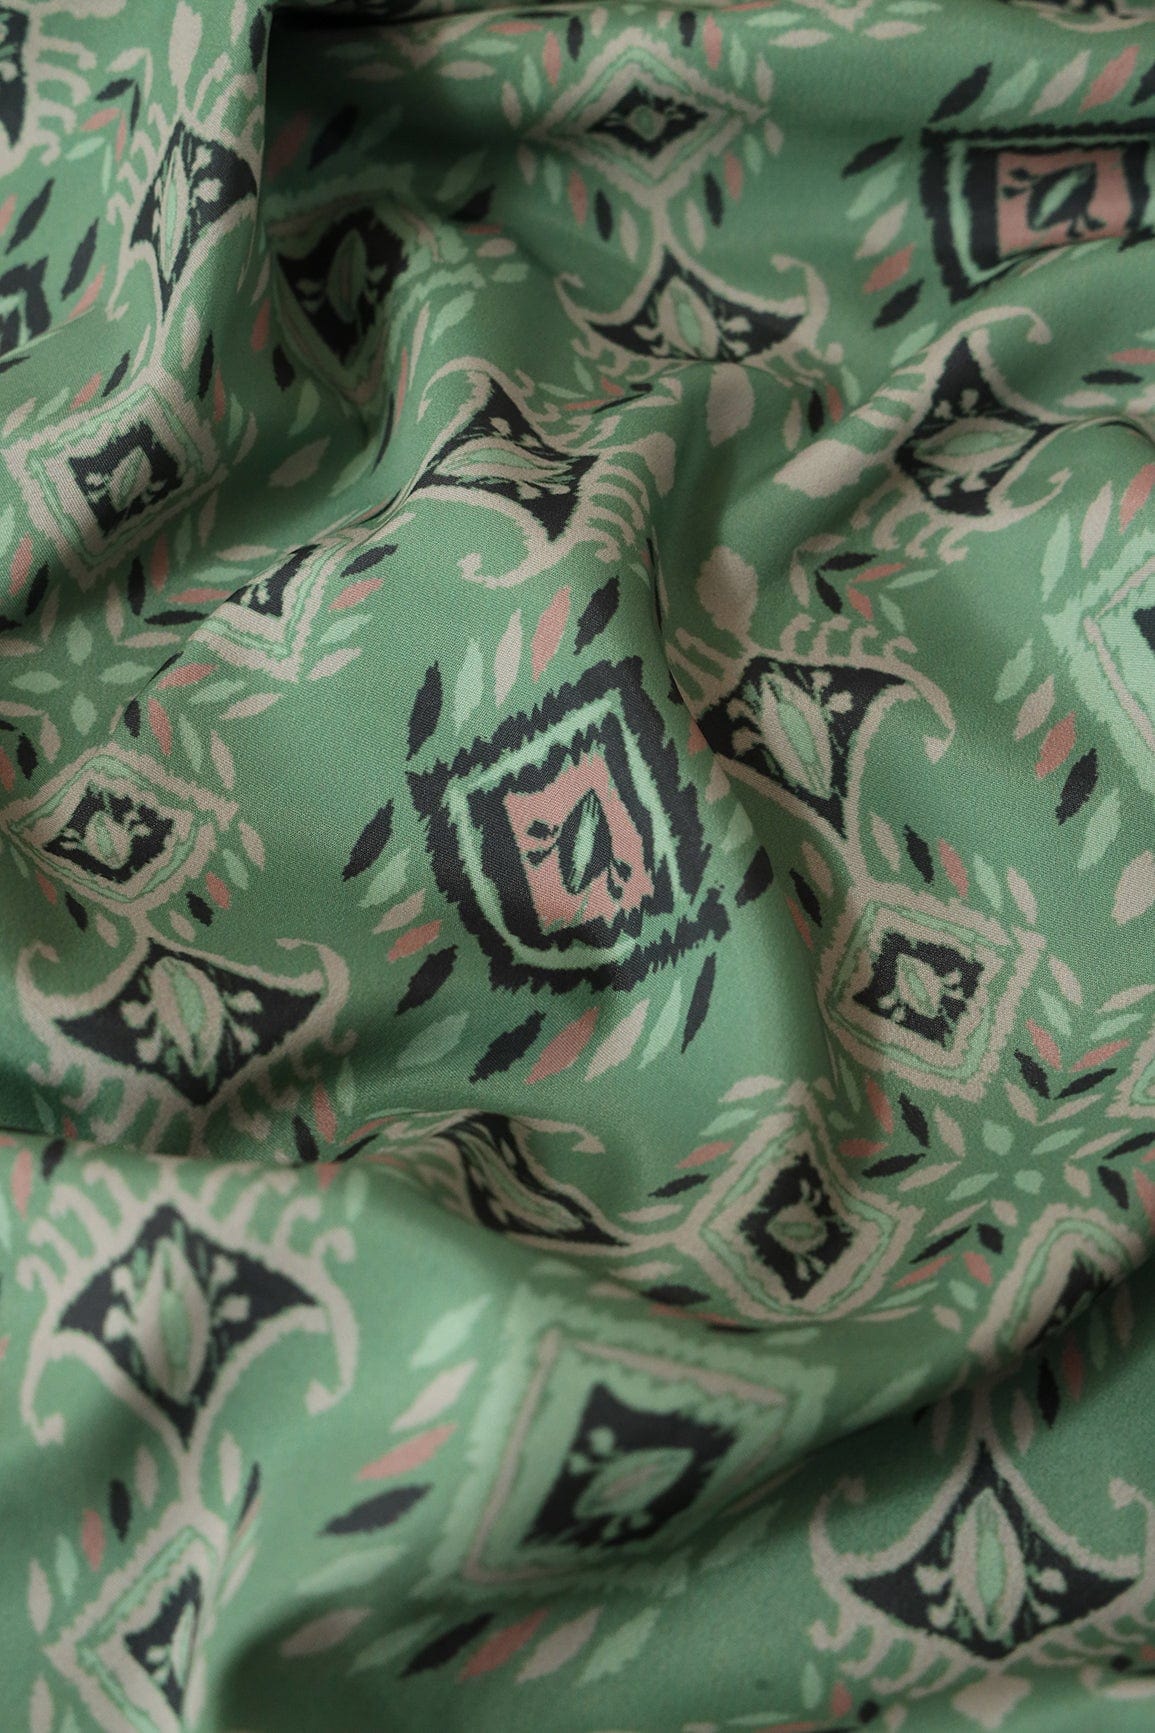 doeraa Prints Pickle Green And Pastel Green Geometric Pattern Digital Print On French Crepe Fabric